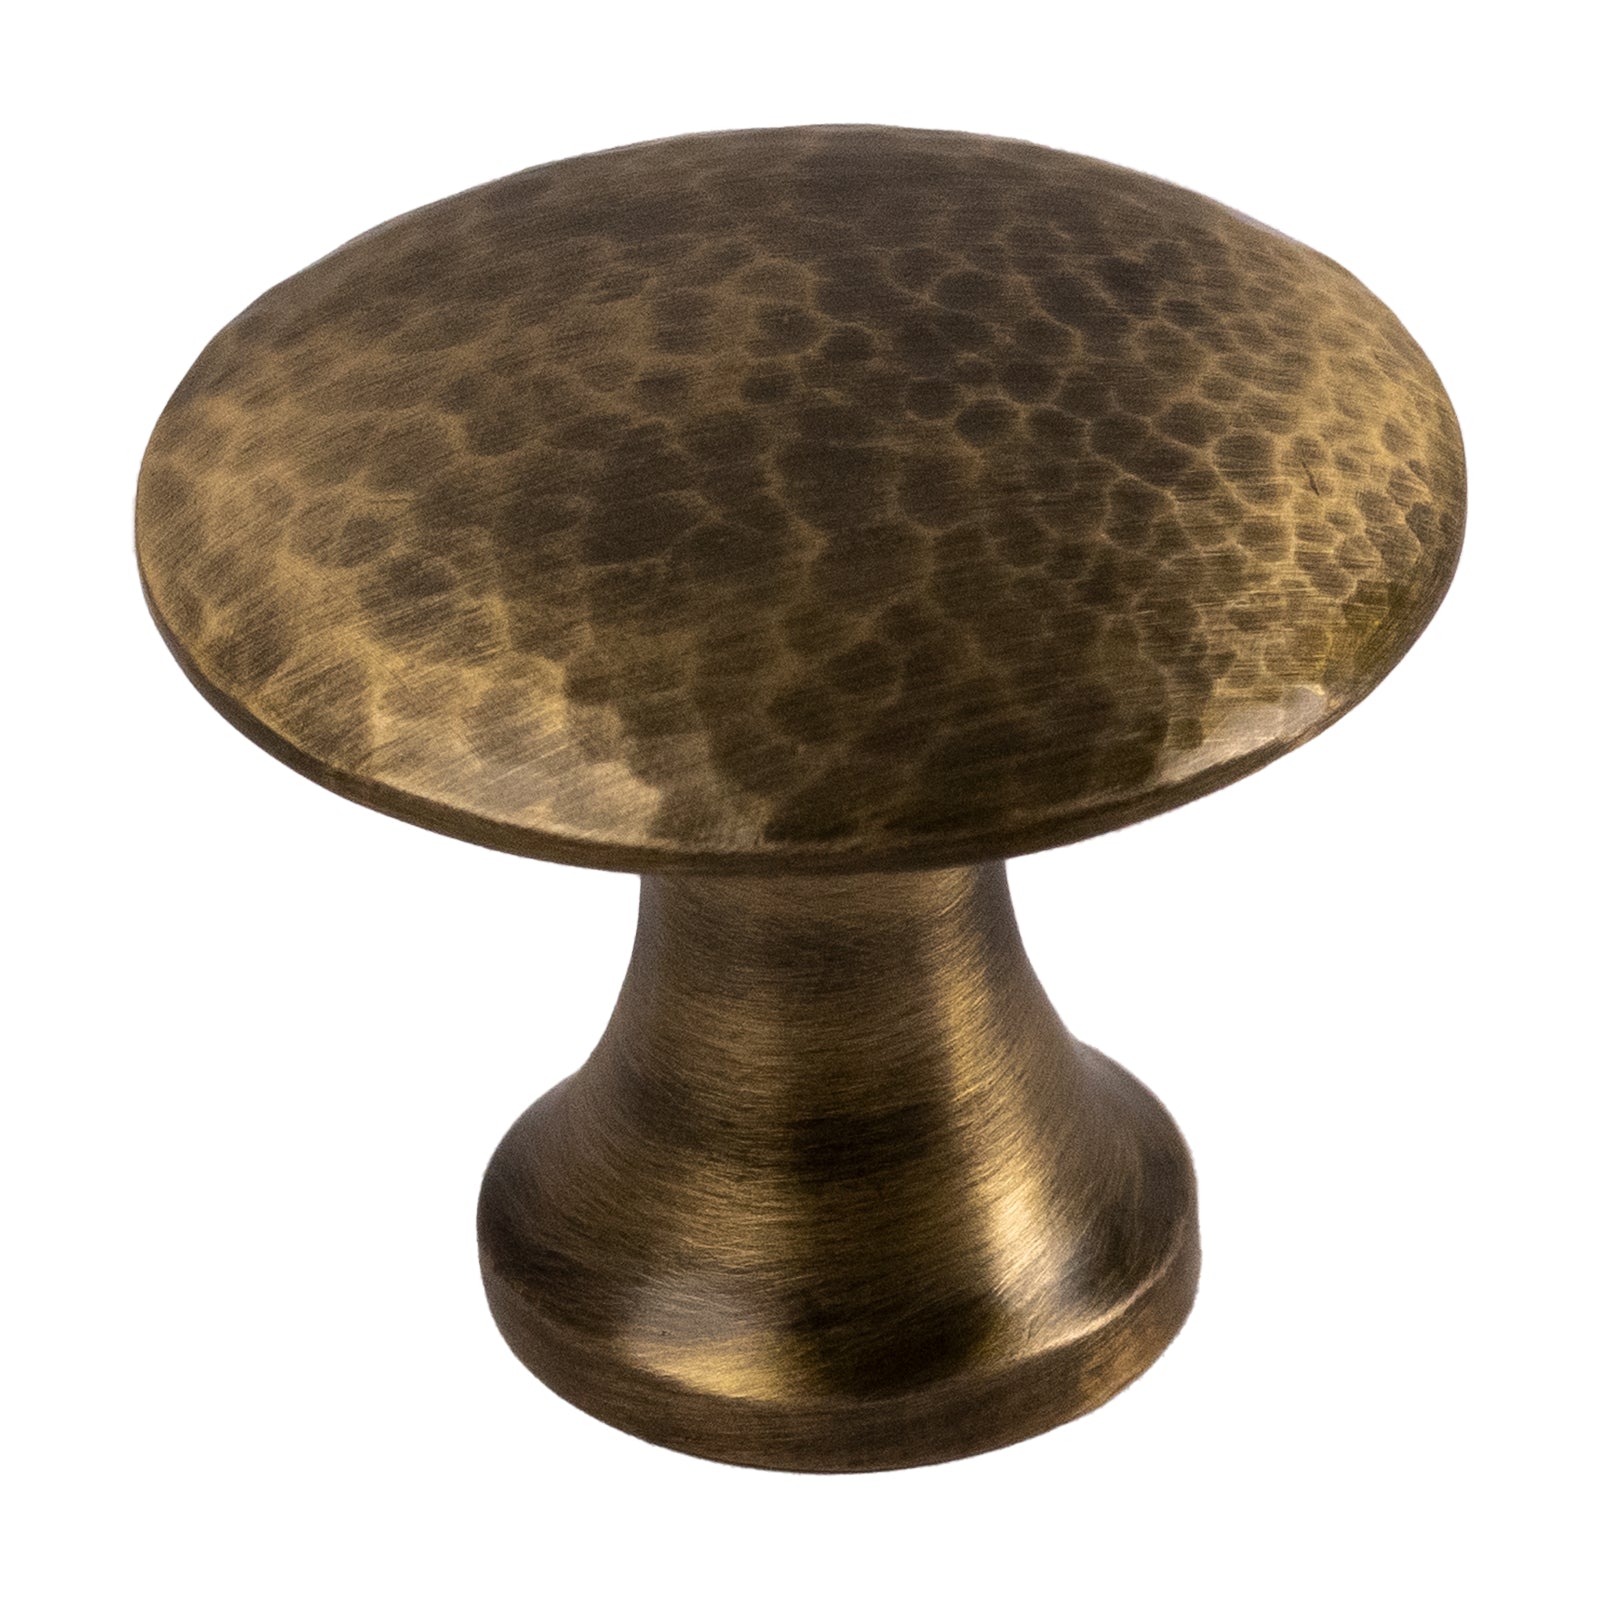 Hammered Classic Cabinet Knobs in Antique Brass 41mm SHOW